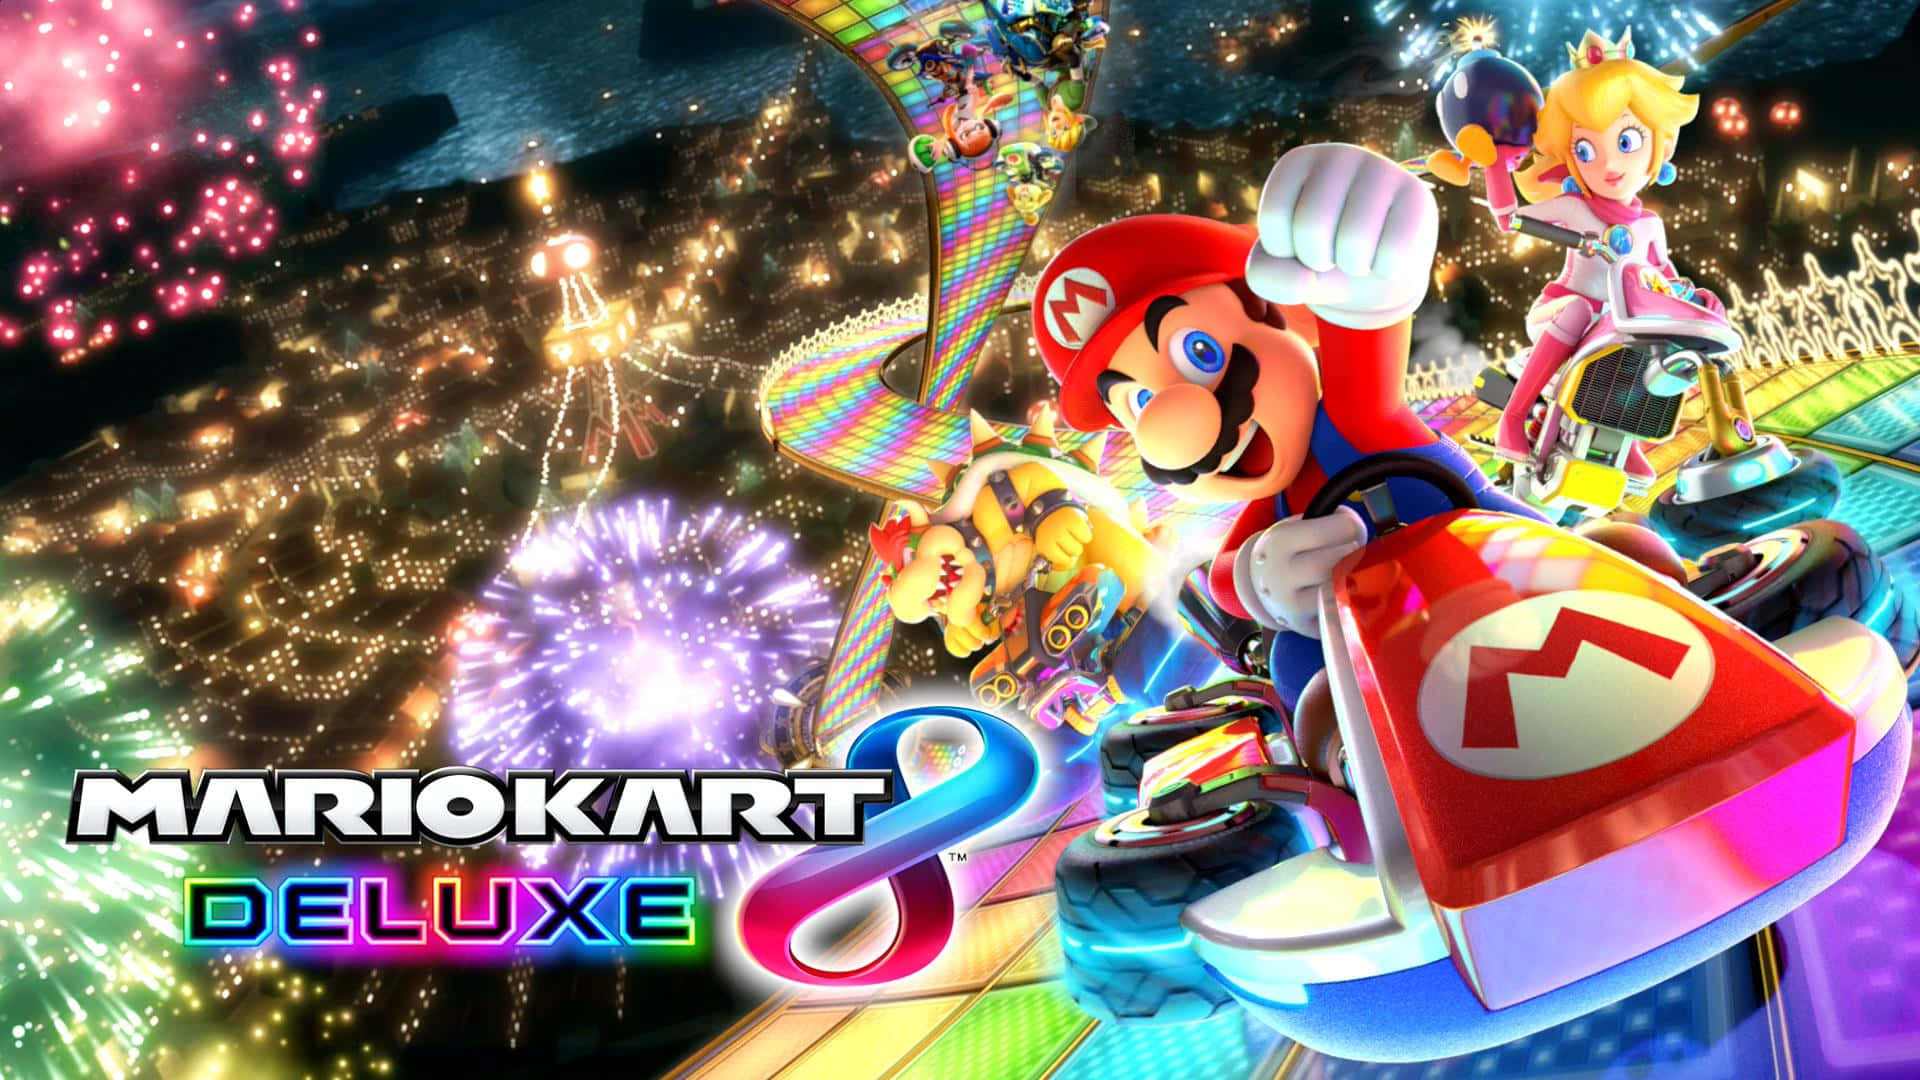 Mario Kart 8 Deluxe racers in action on a thrilling track Wallpaper